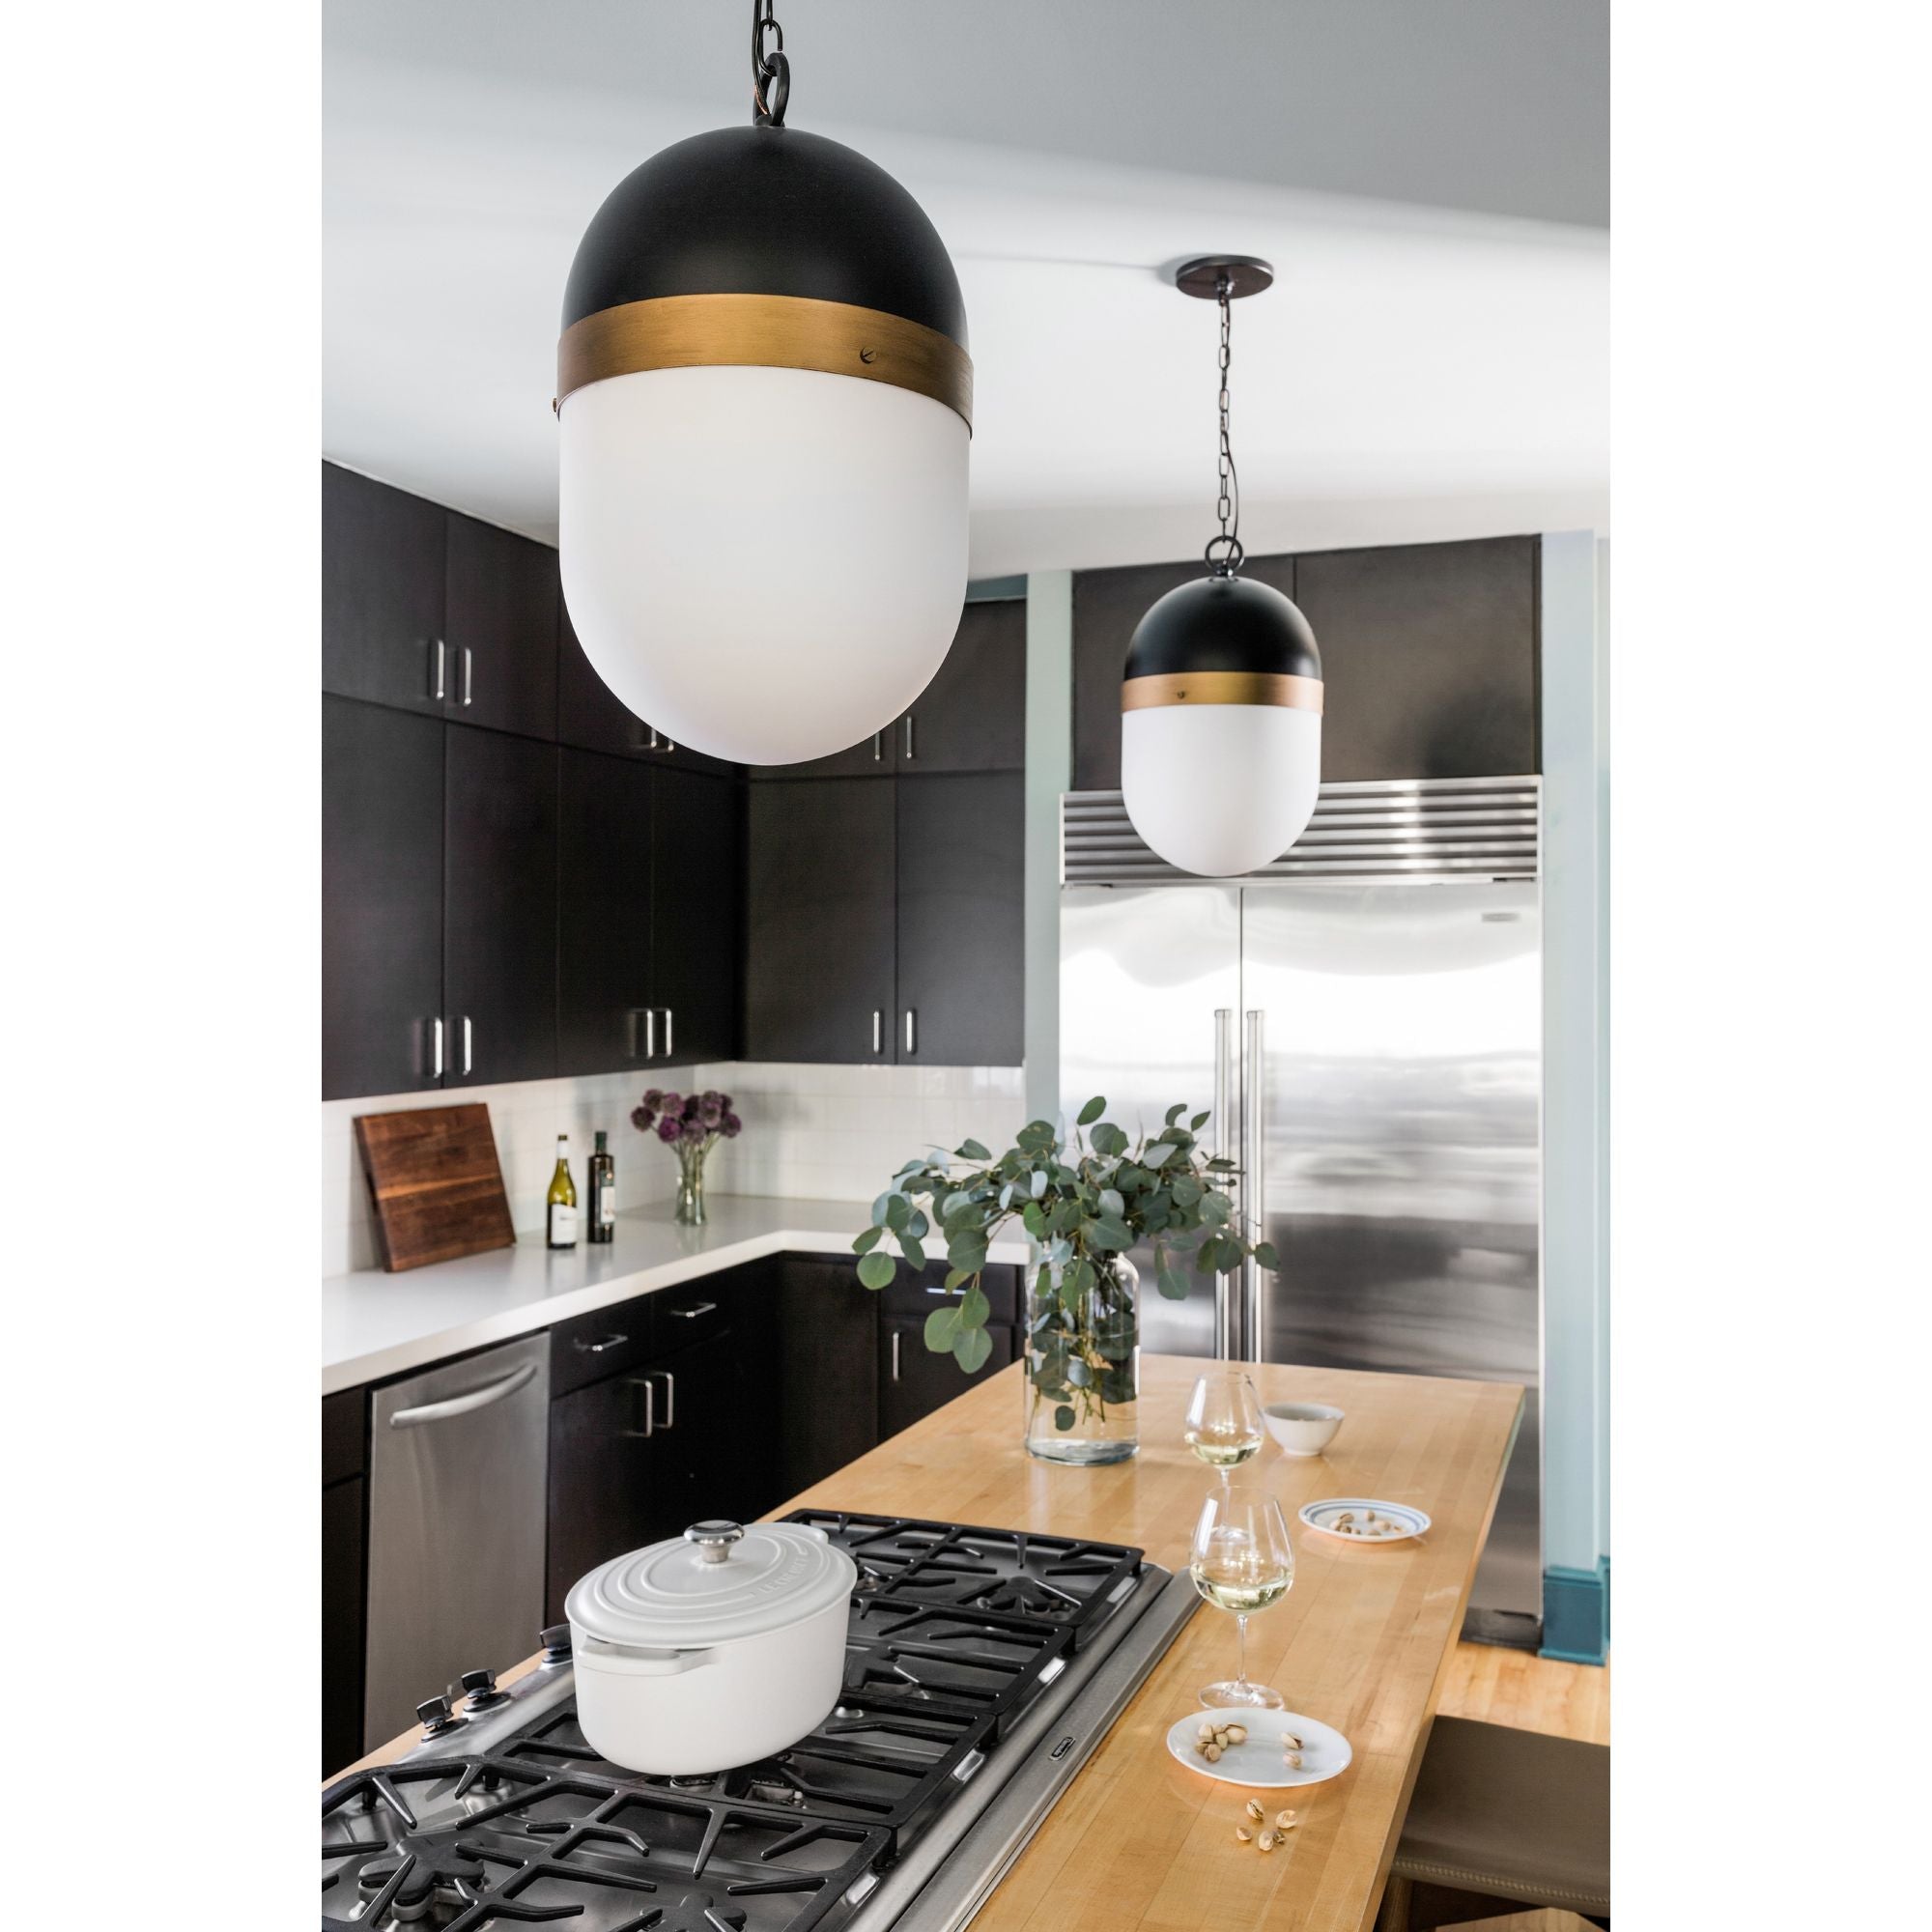 Brian Patrick Flynn for Crystorama Capsule 3 Light Matte Black + Textured Gold Outdoor Pendant